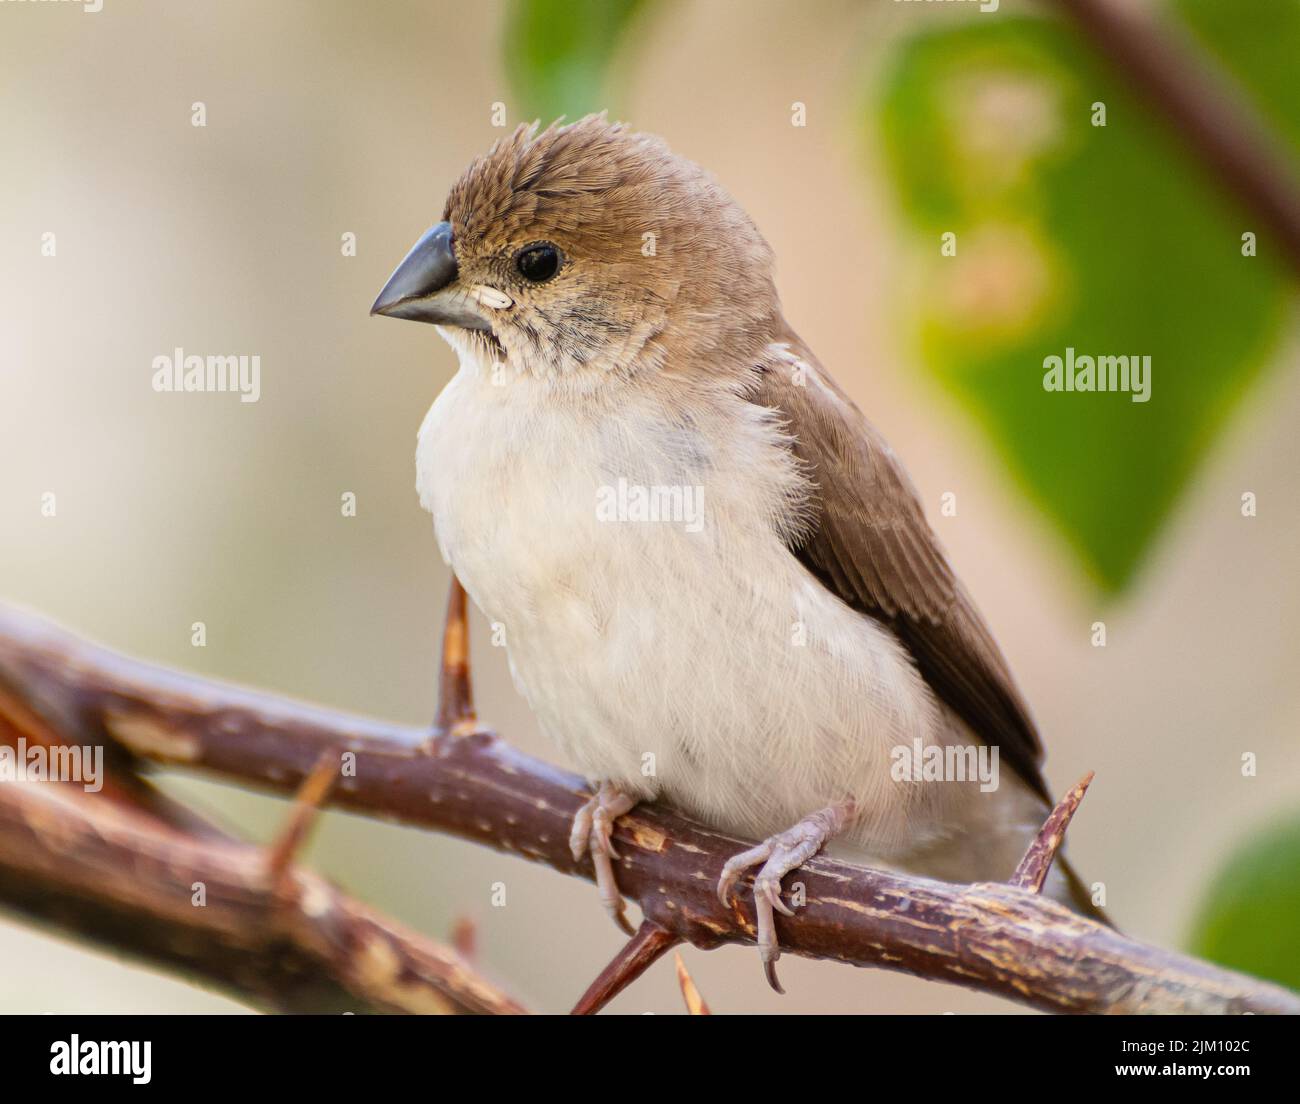 A beautiful shot of an Indian silverbell bird perched on a twig in the garden on a sunny day with blurred background Stock Photo